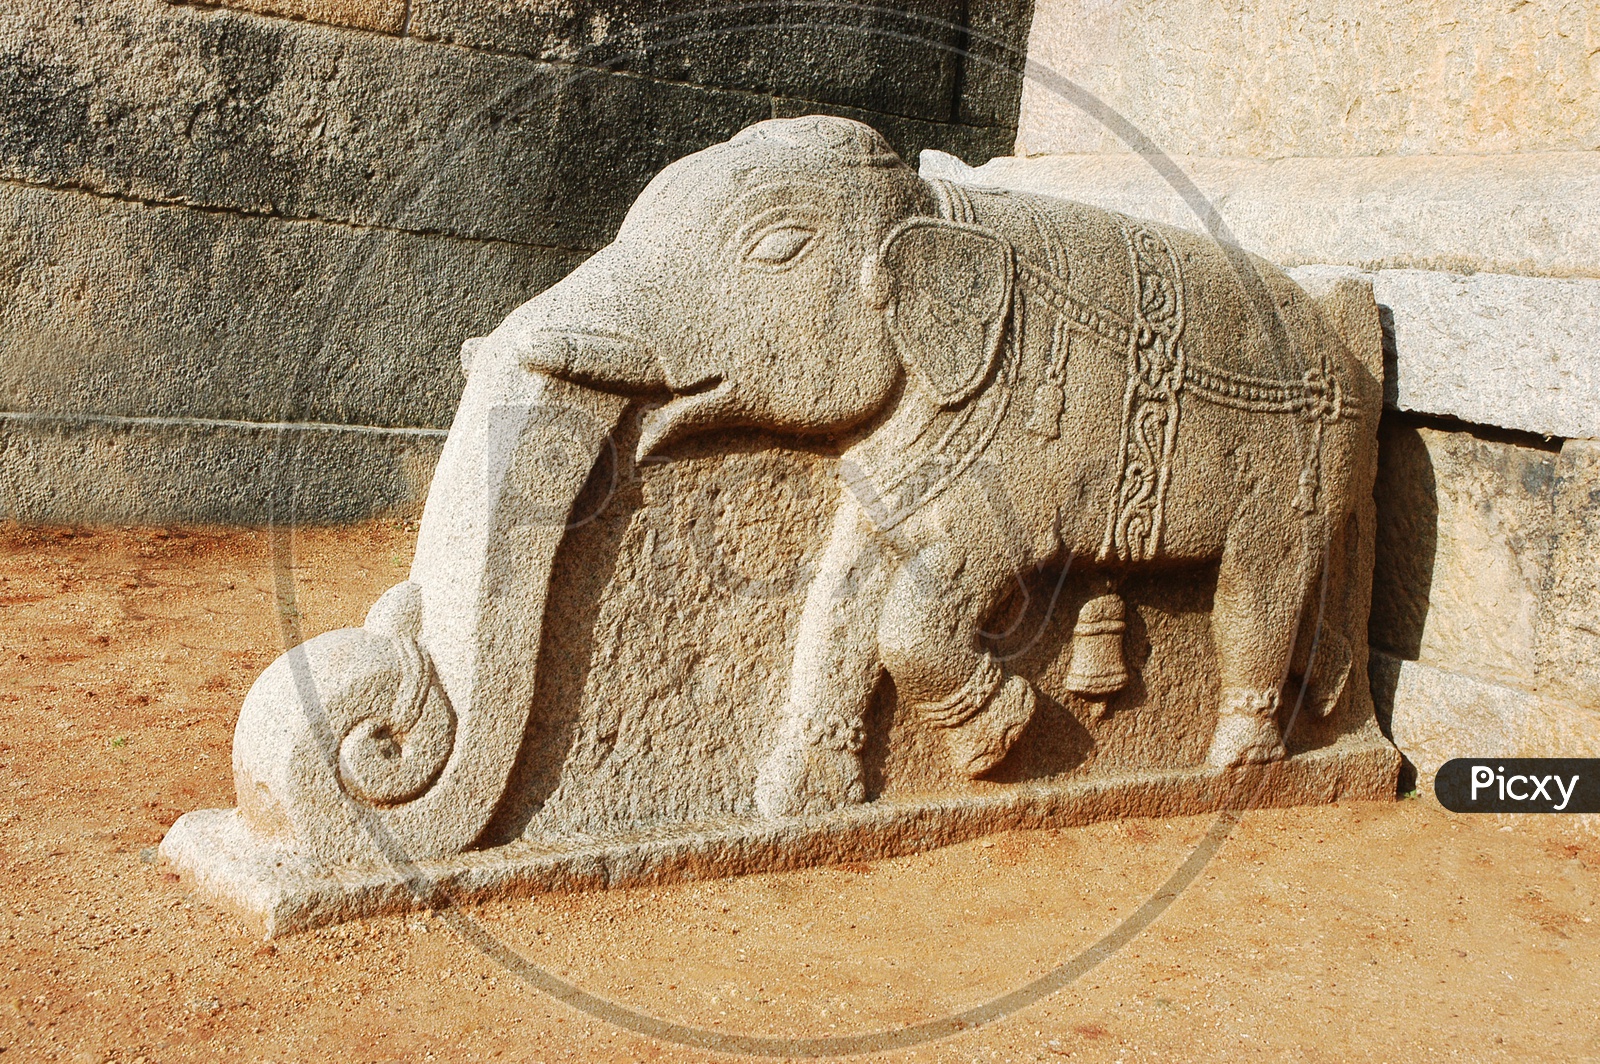 Elephant stone architecture in a temple